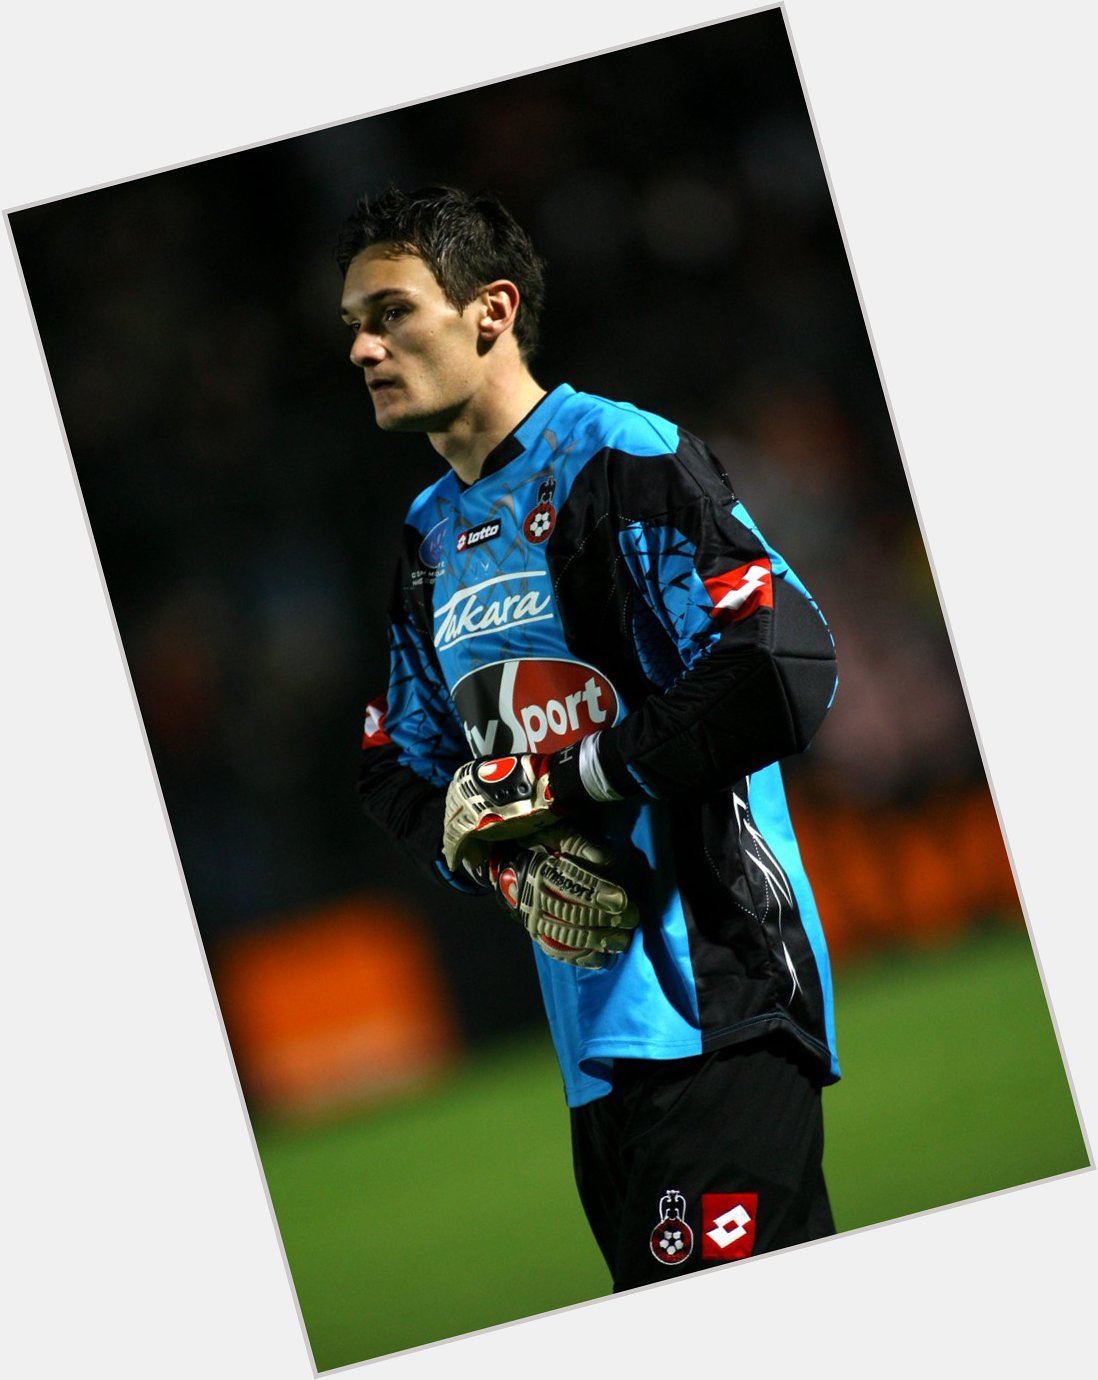   Happy Birthday to Hugo !
The former and player is 32 today!   